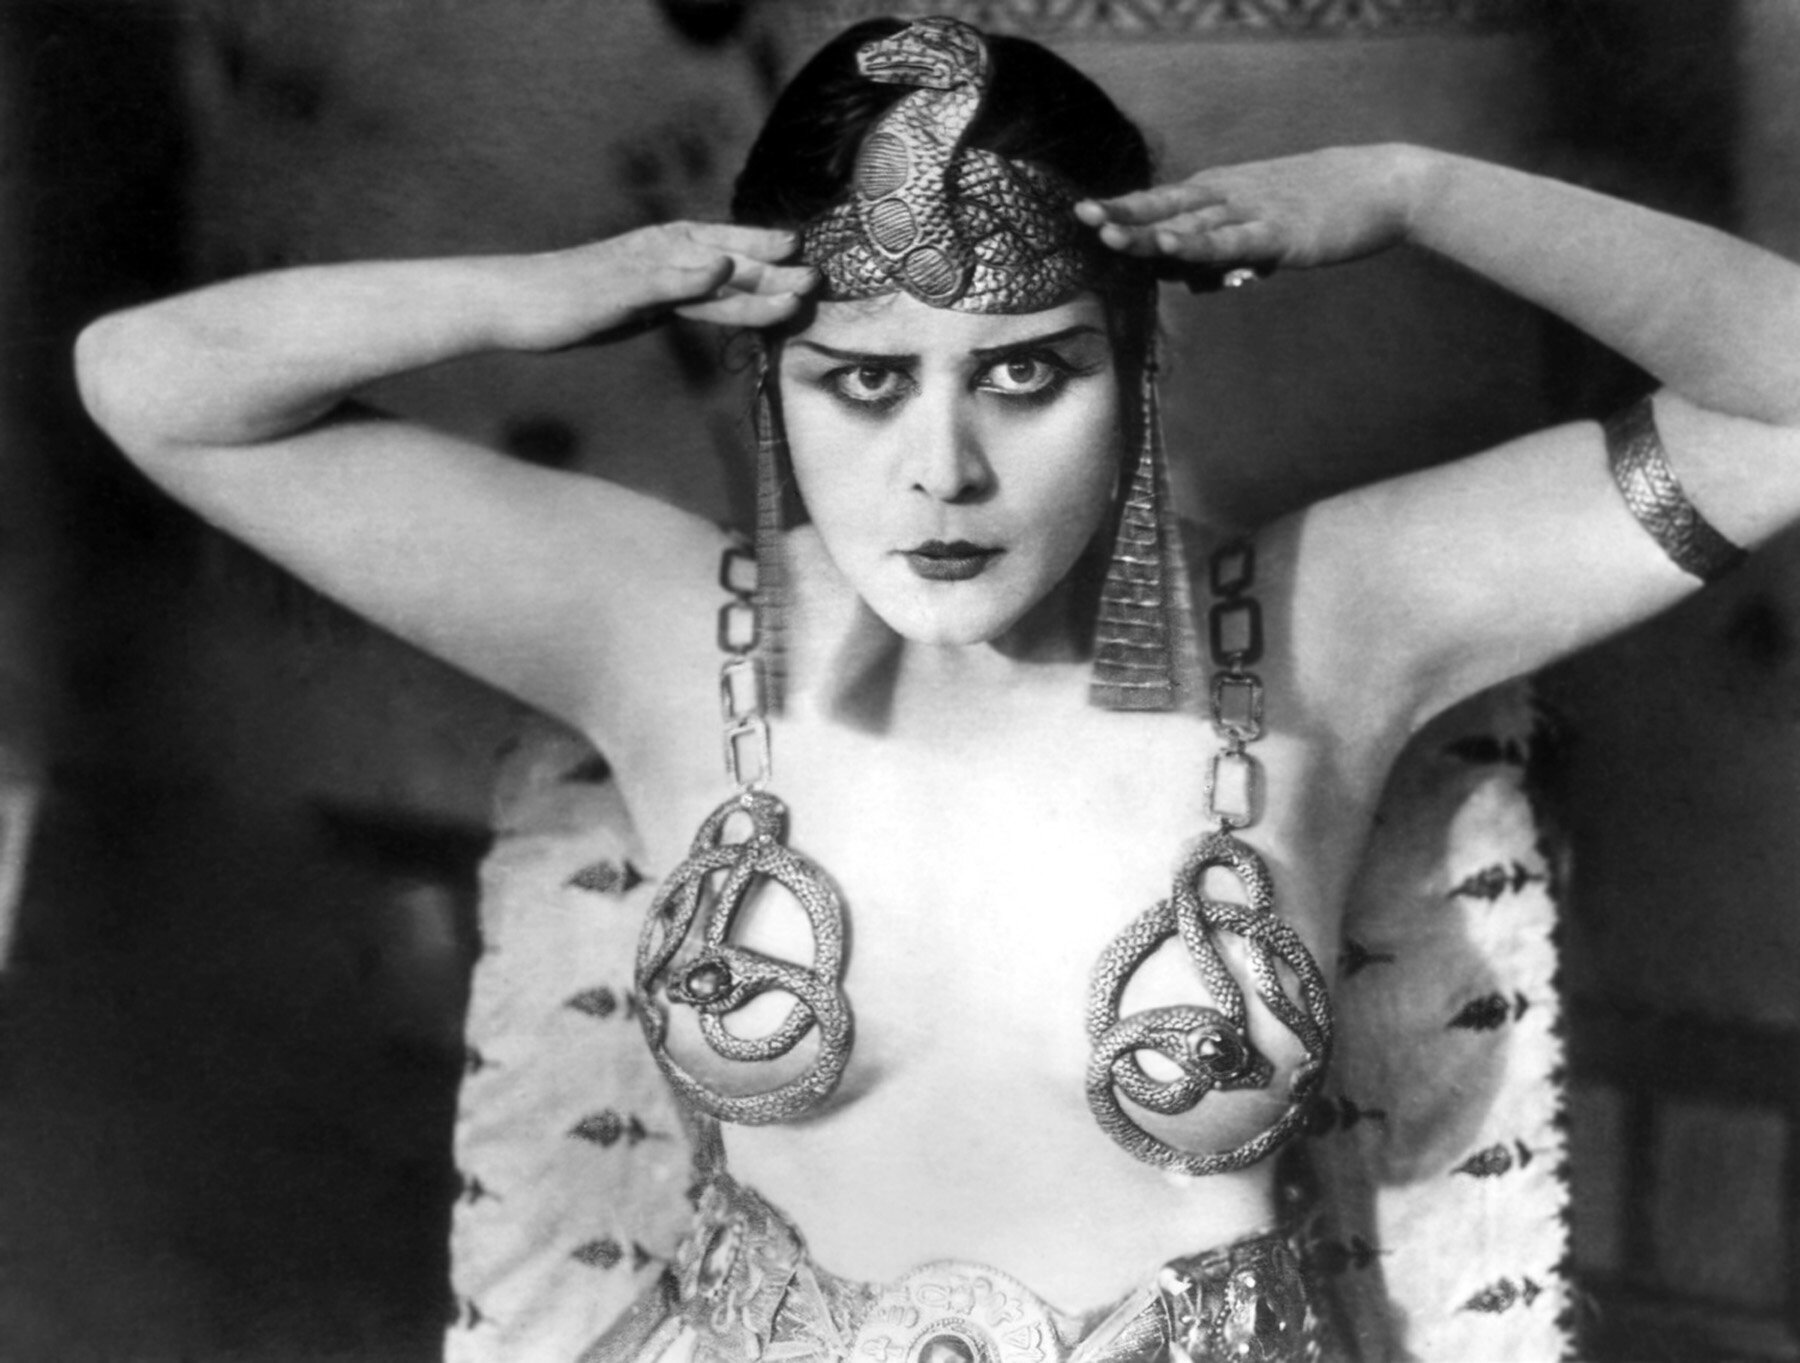 1917: Promotional portrait of American actor Theda Bara (1885 - 1955) wearing an Egyptian headdress and breast plates with a snake design for director J Gordon Edwards' film, 'Cleopatra'.